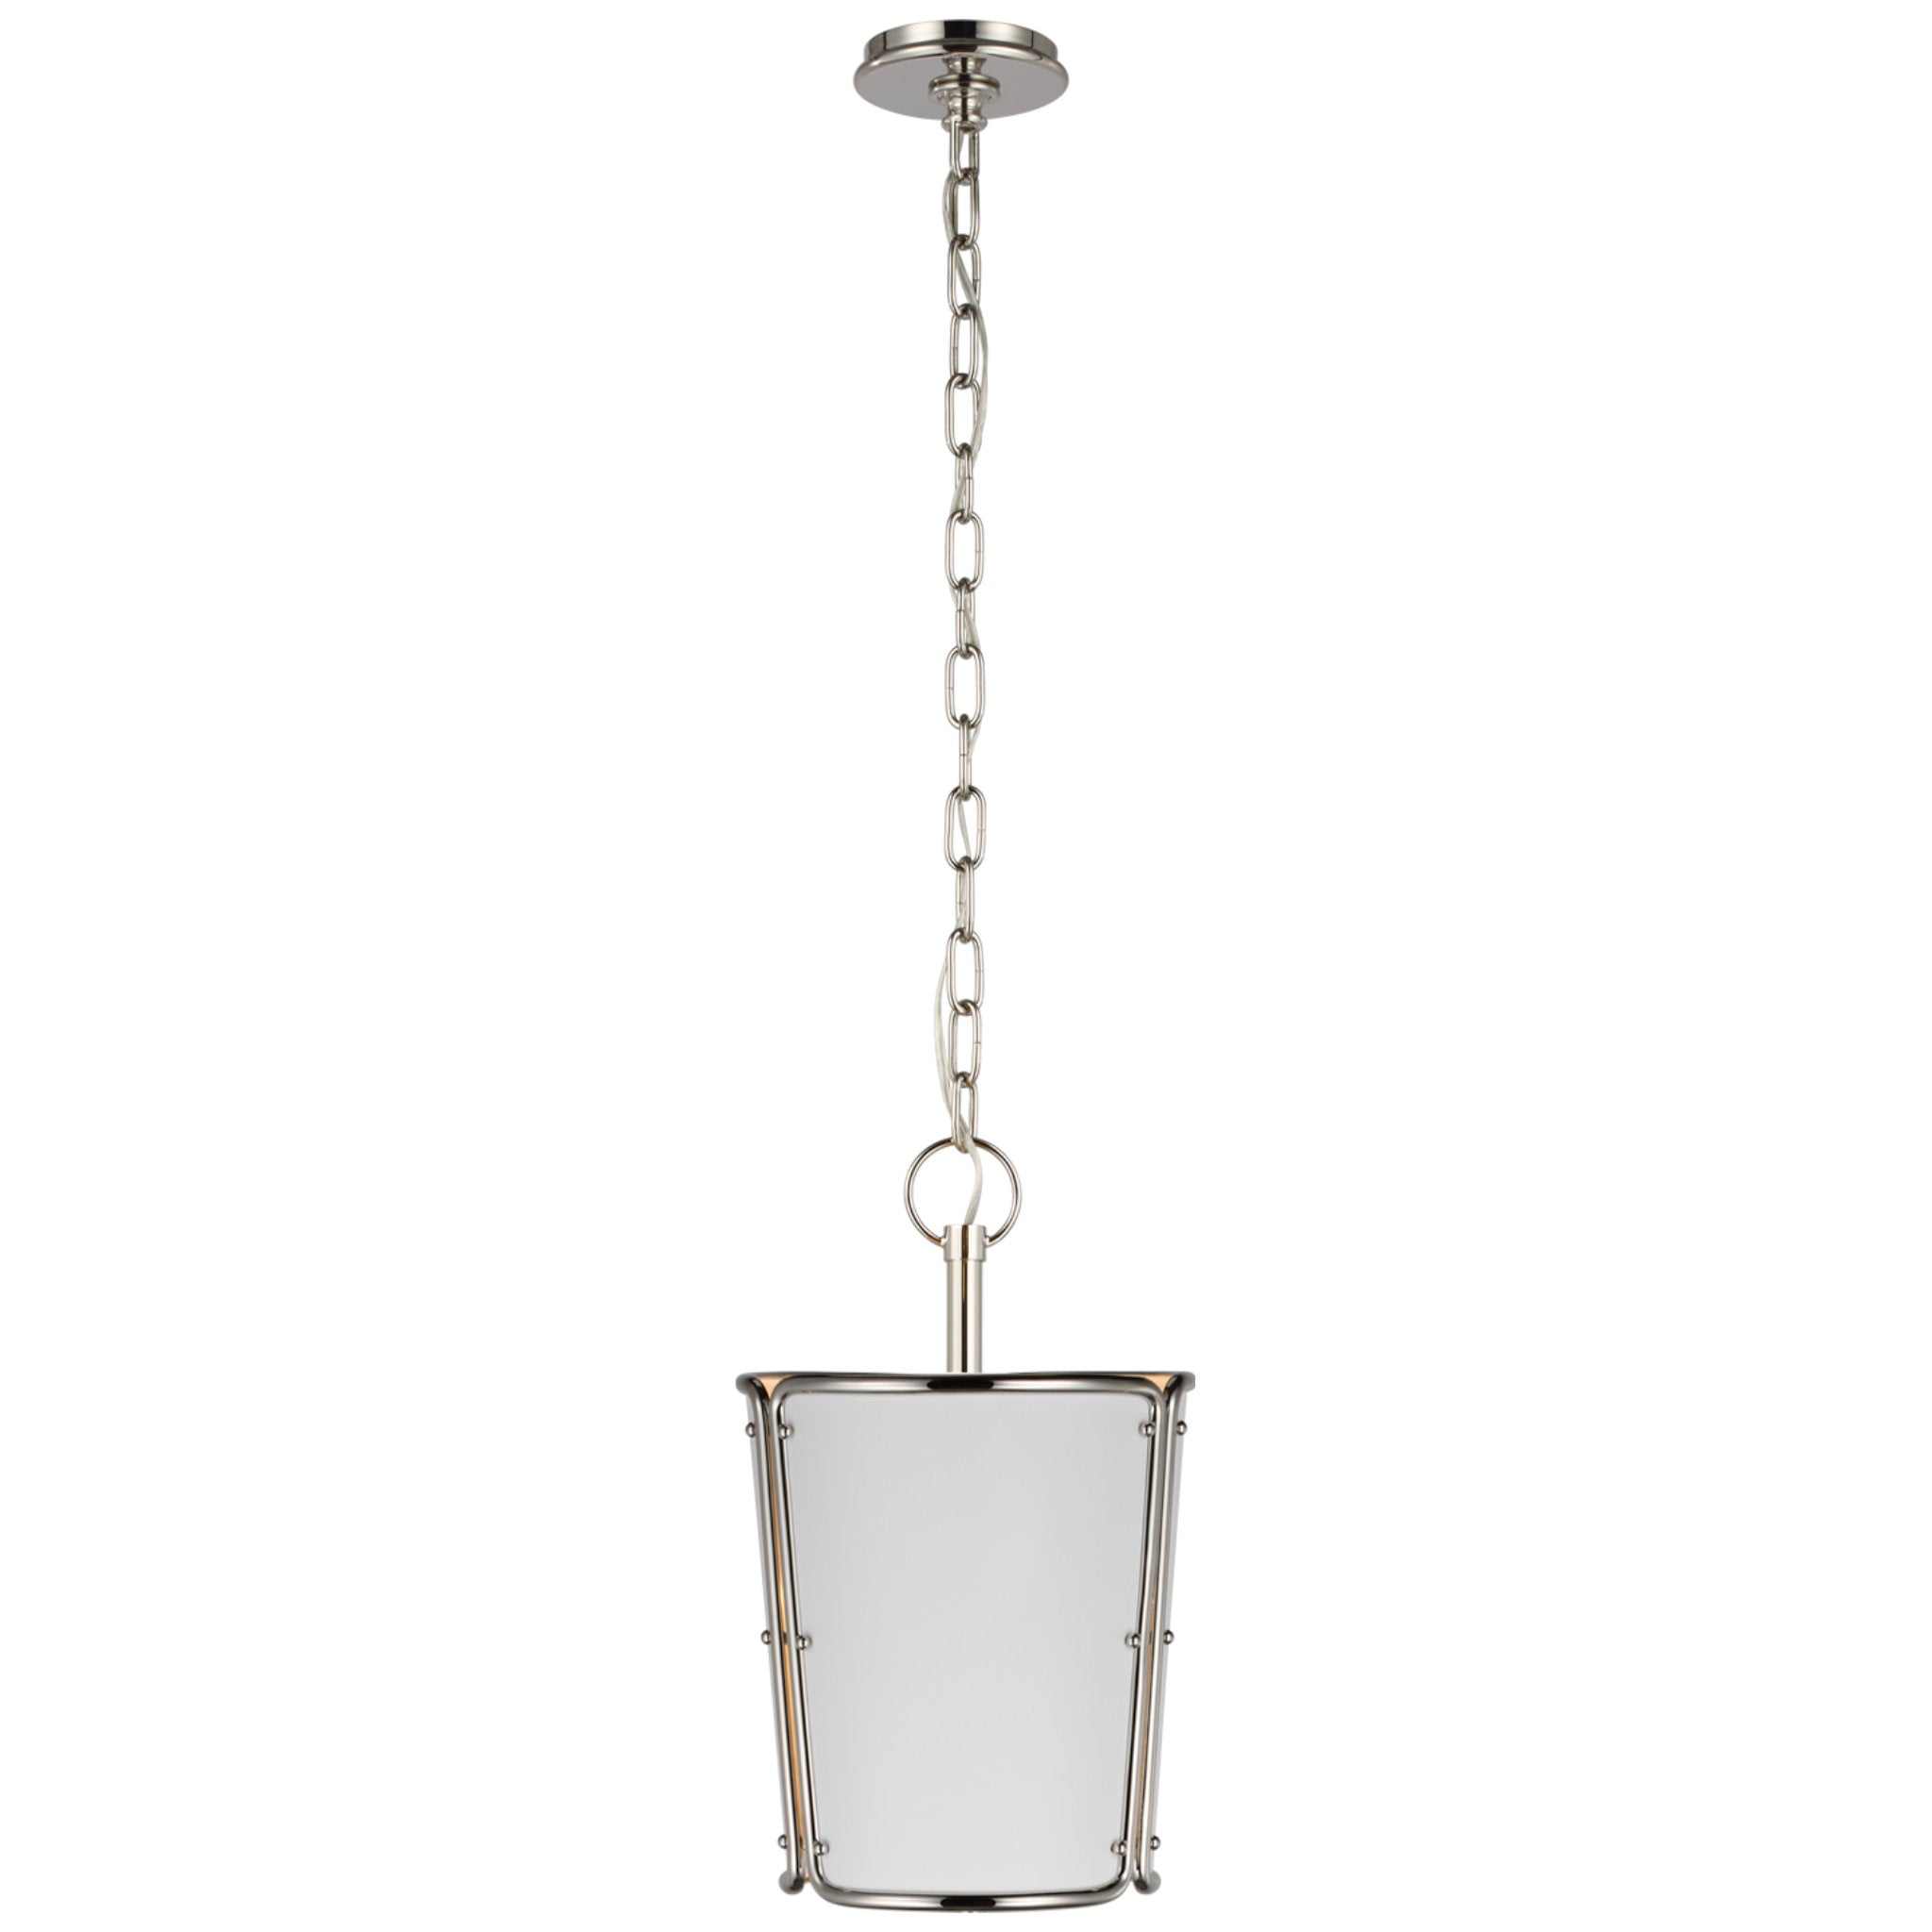 Carrier and Company Hastings Small Pendant in Polished Nickel with White Shade